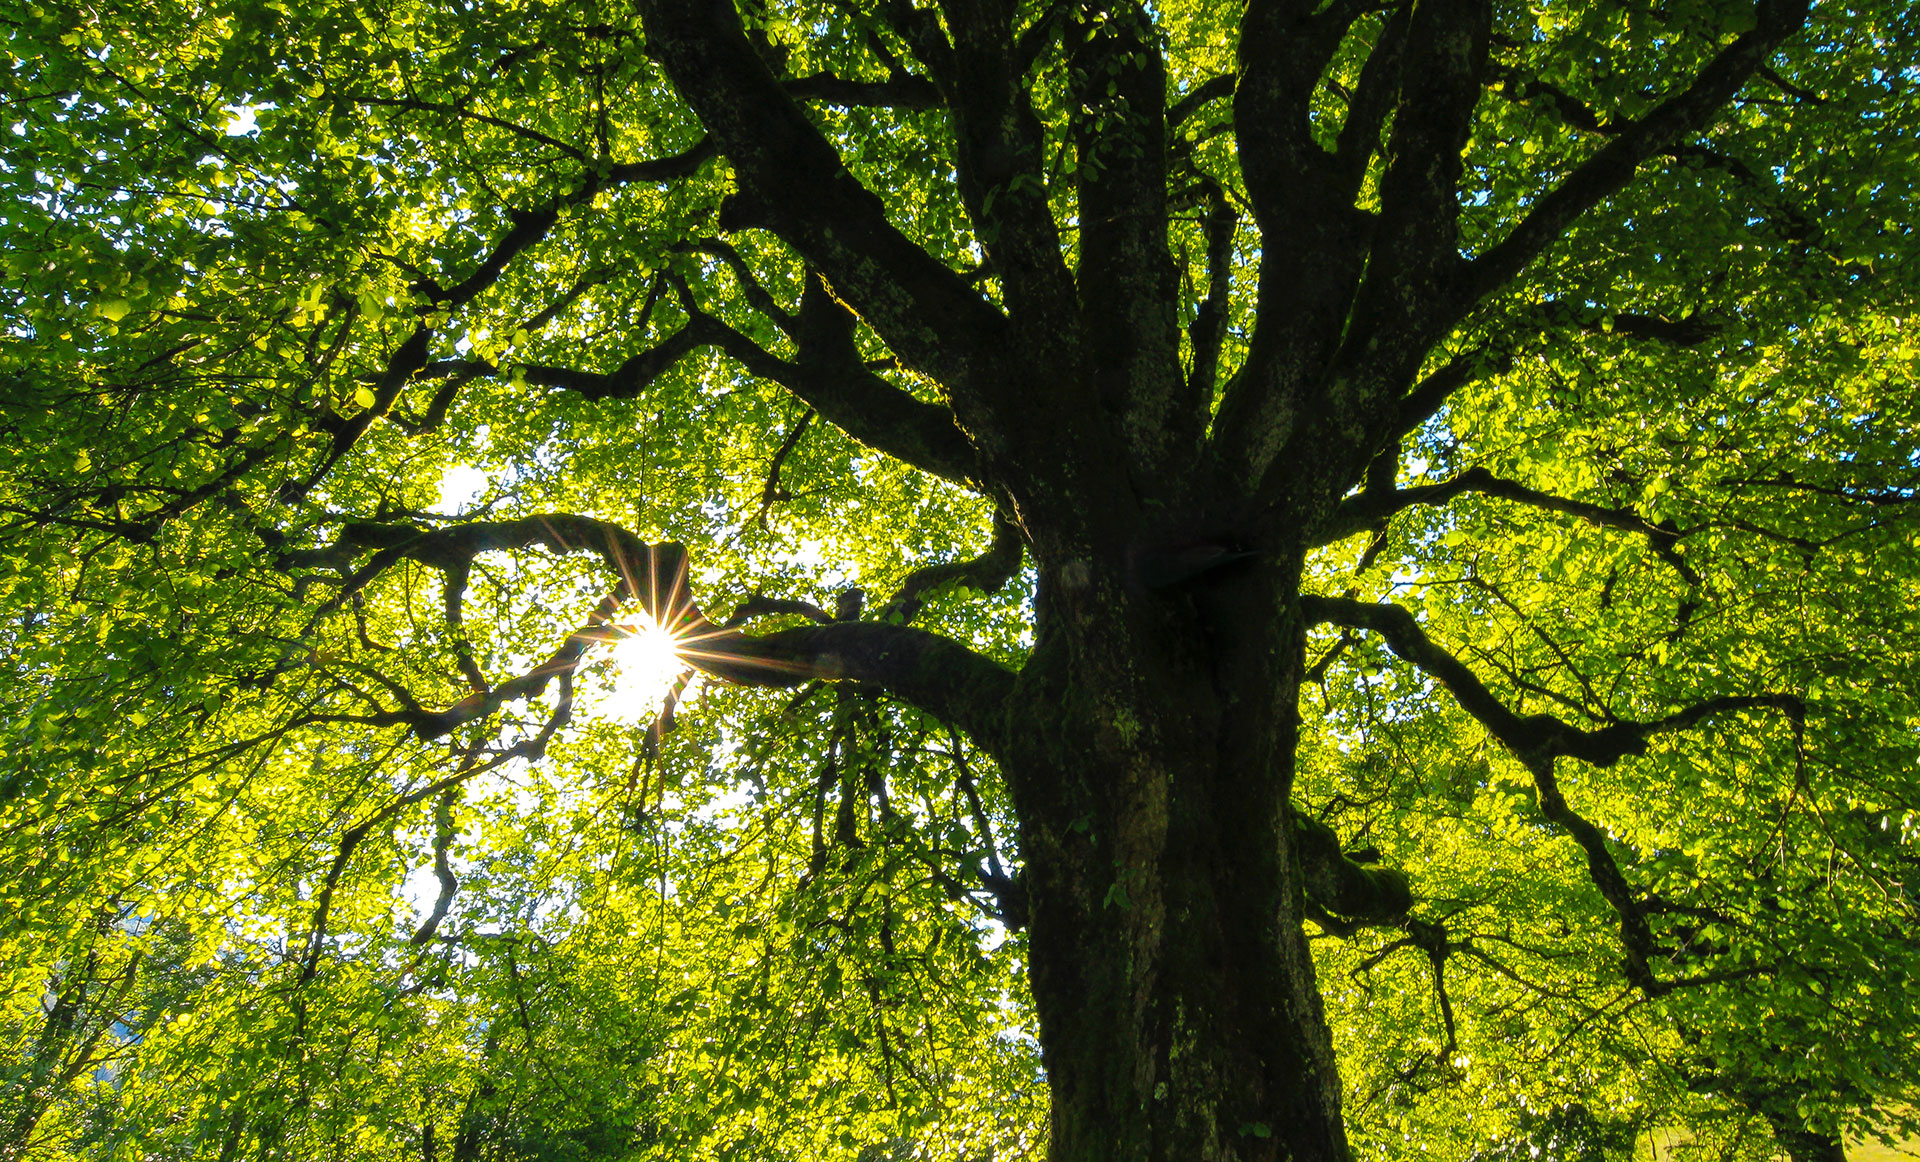 Can Trees Teach Us About Ethical Behavior?